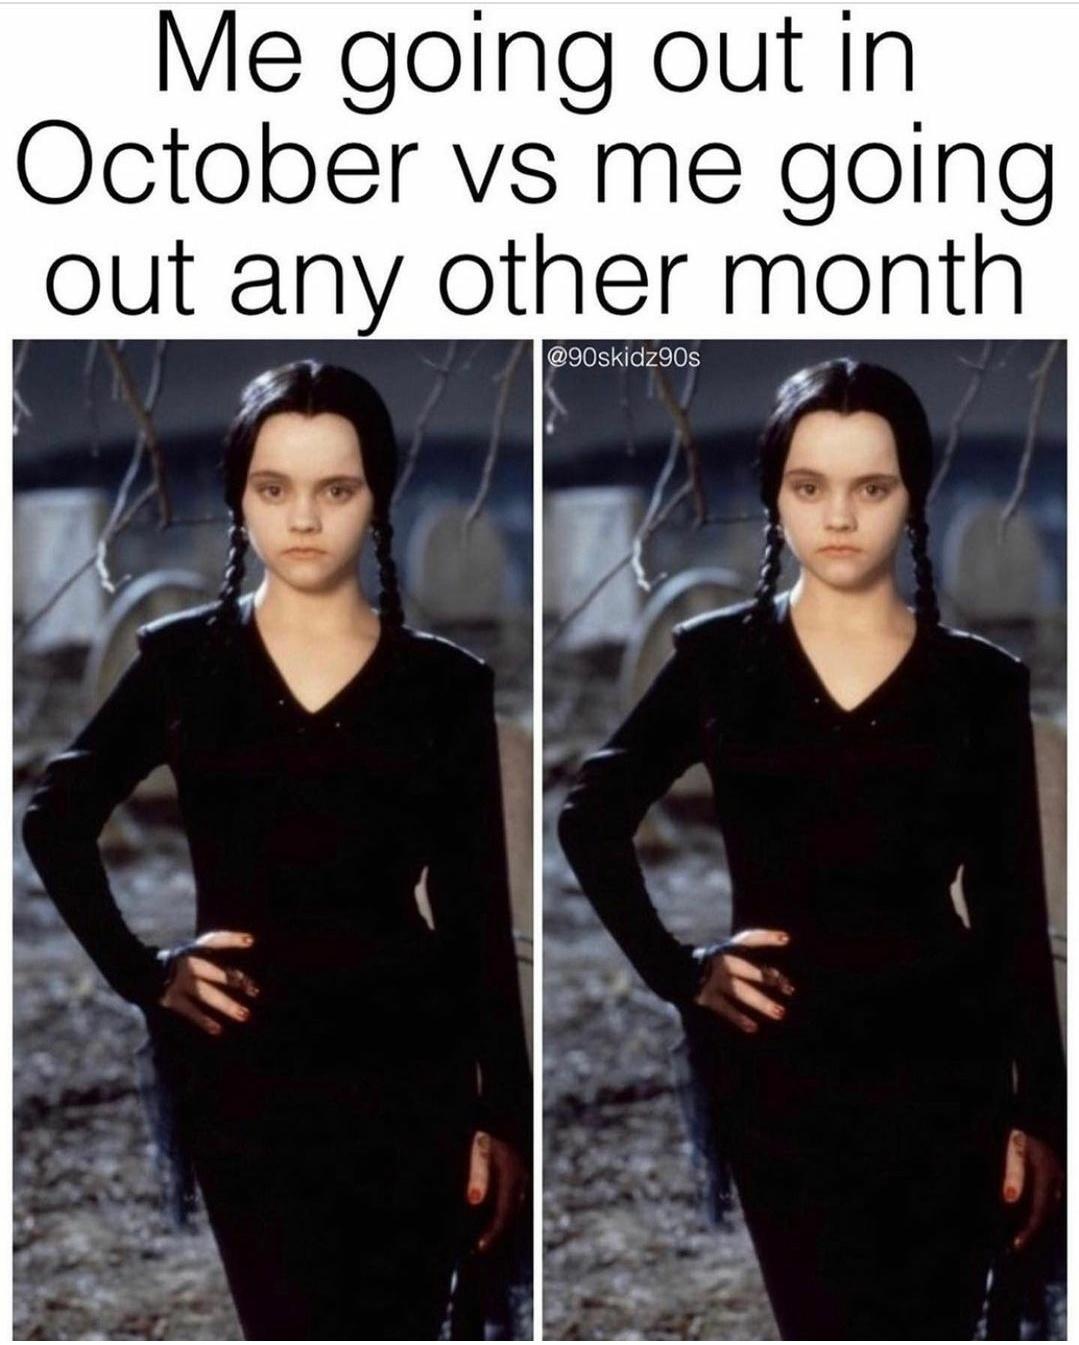 funny memes - cute cats - shoulder - Me going out in October vs me going out any other month